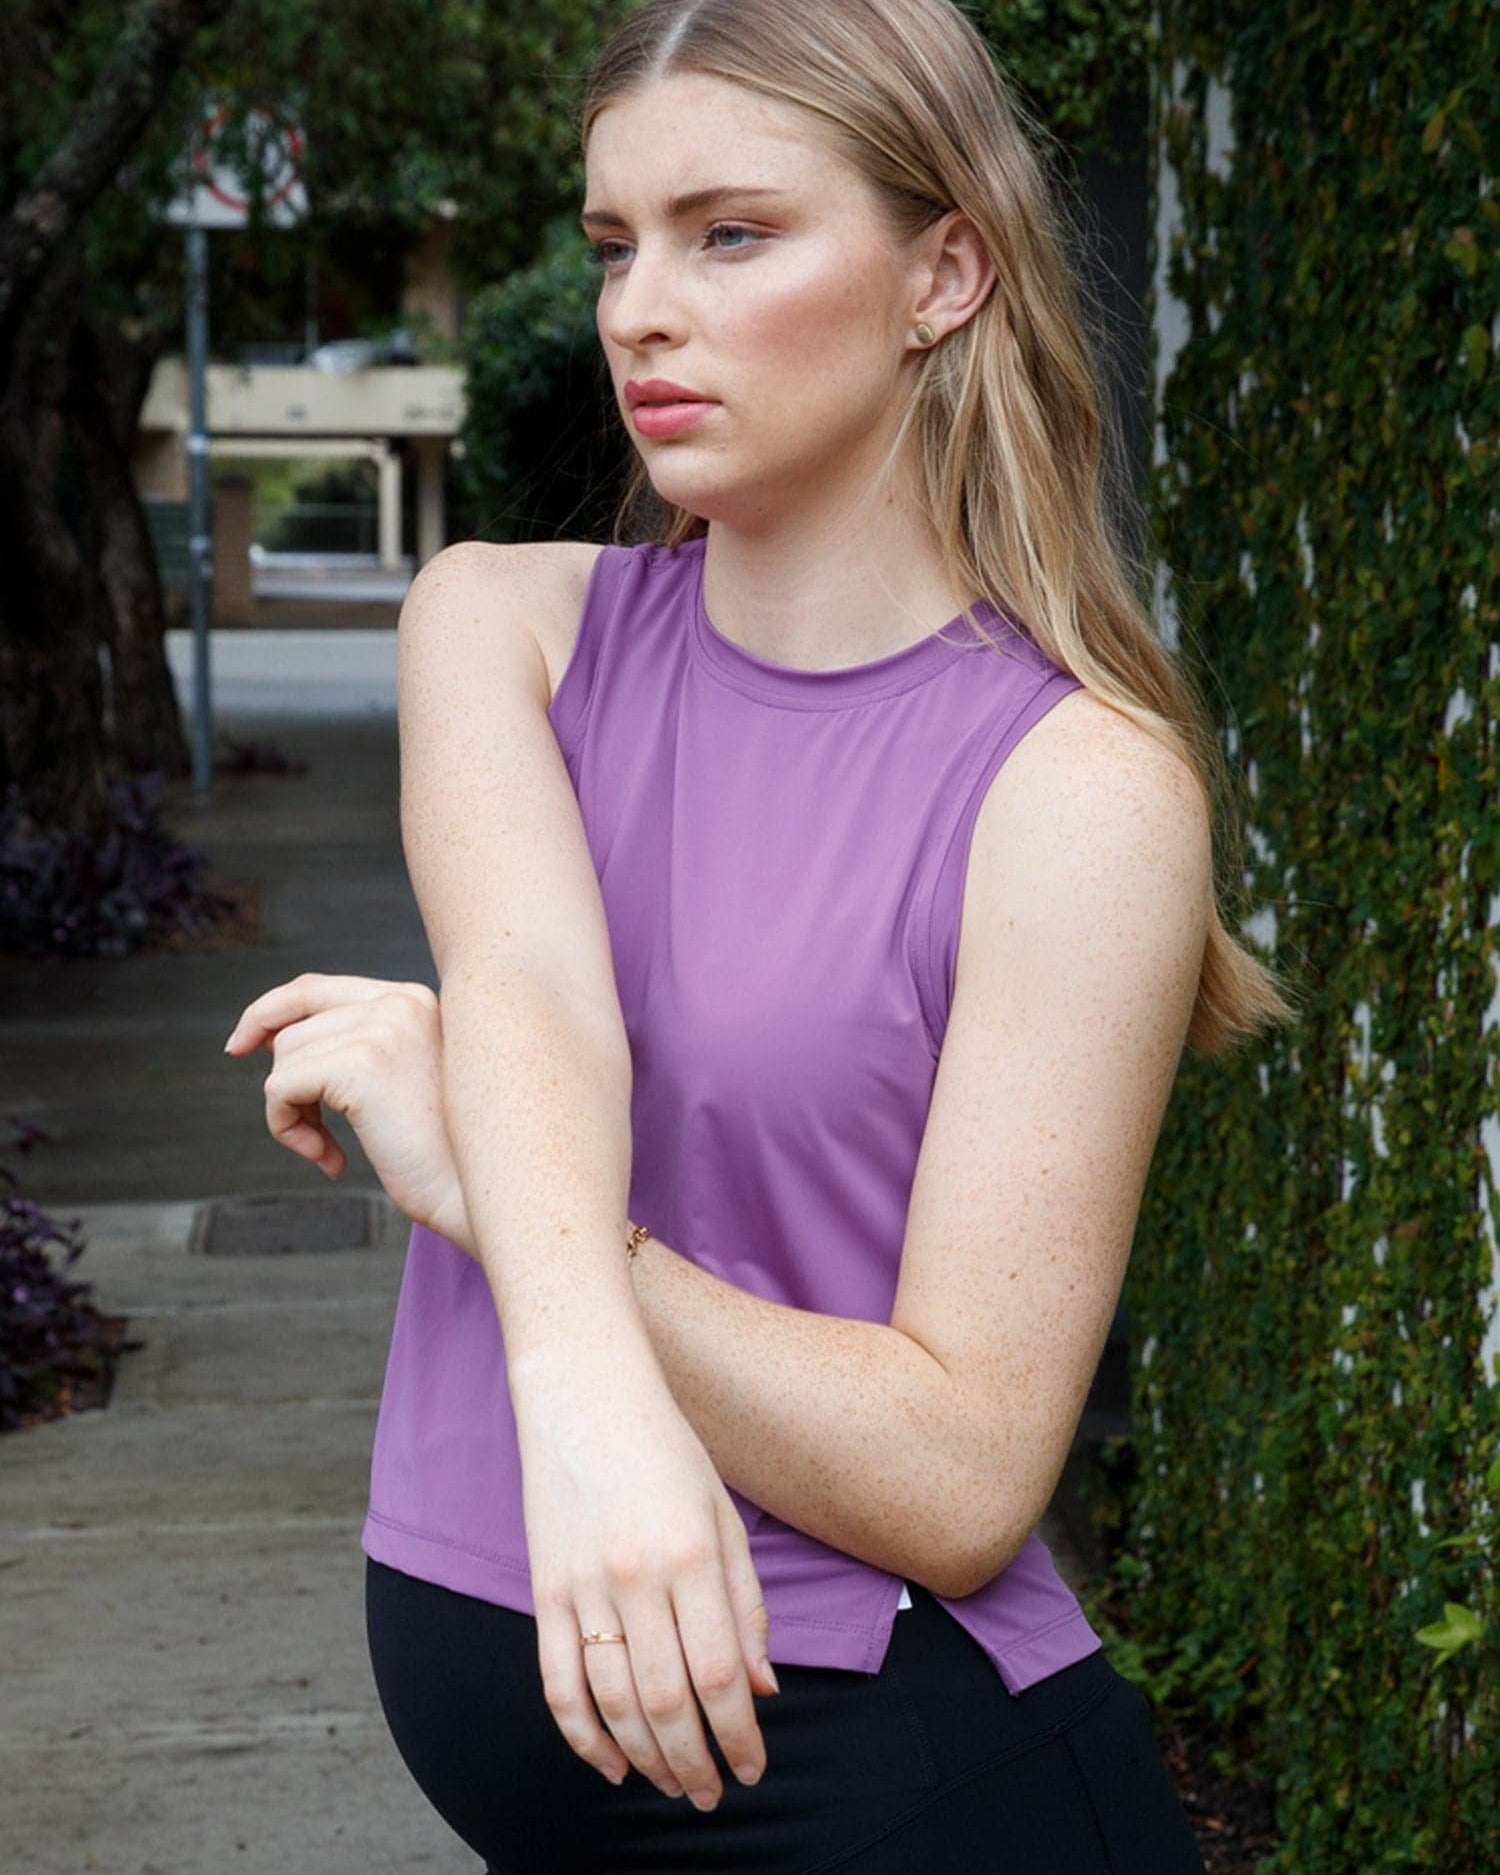 Sports Short Tank Top in Purple and Black (6658182217831)